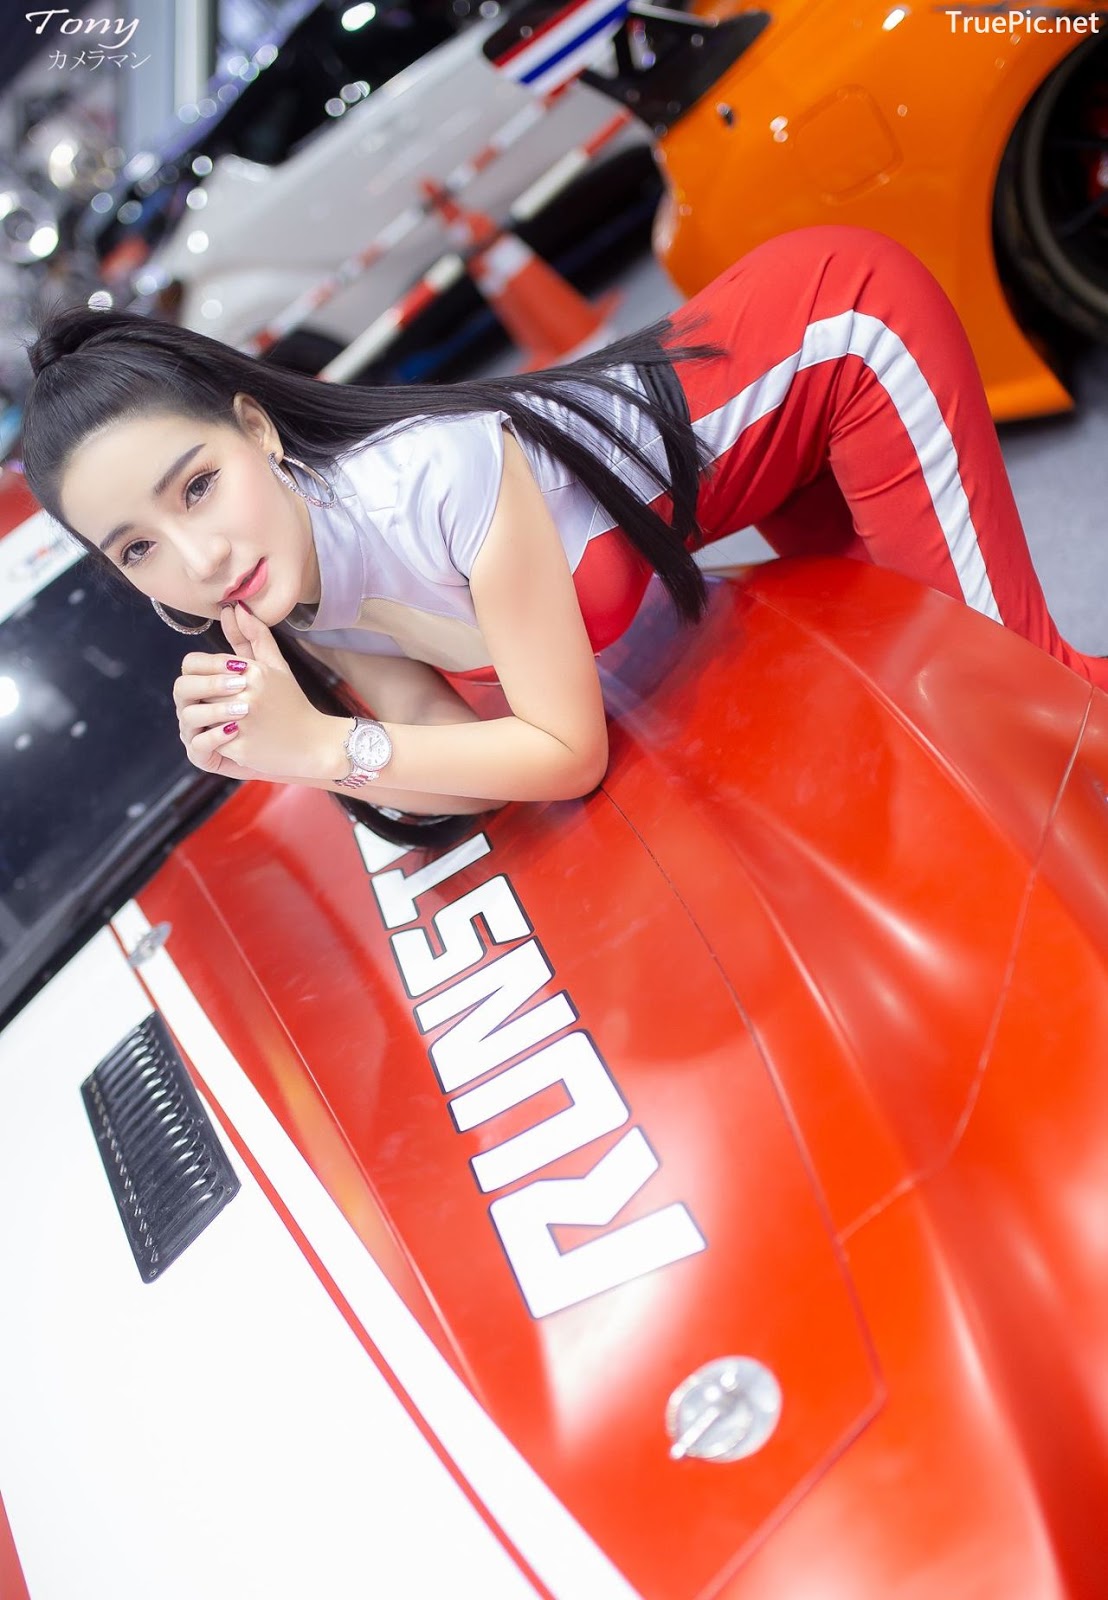 Image-Thailand-Hot-Model-Thai-Racing-Girl-At-Motor-Expo-2018-TruePic.net- Picture-111